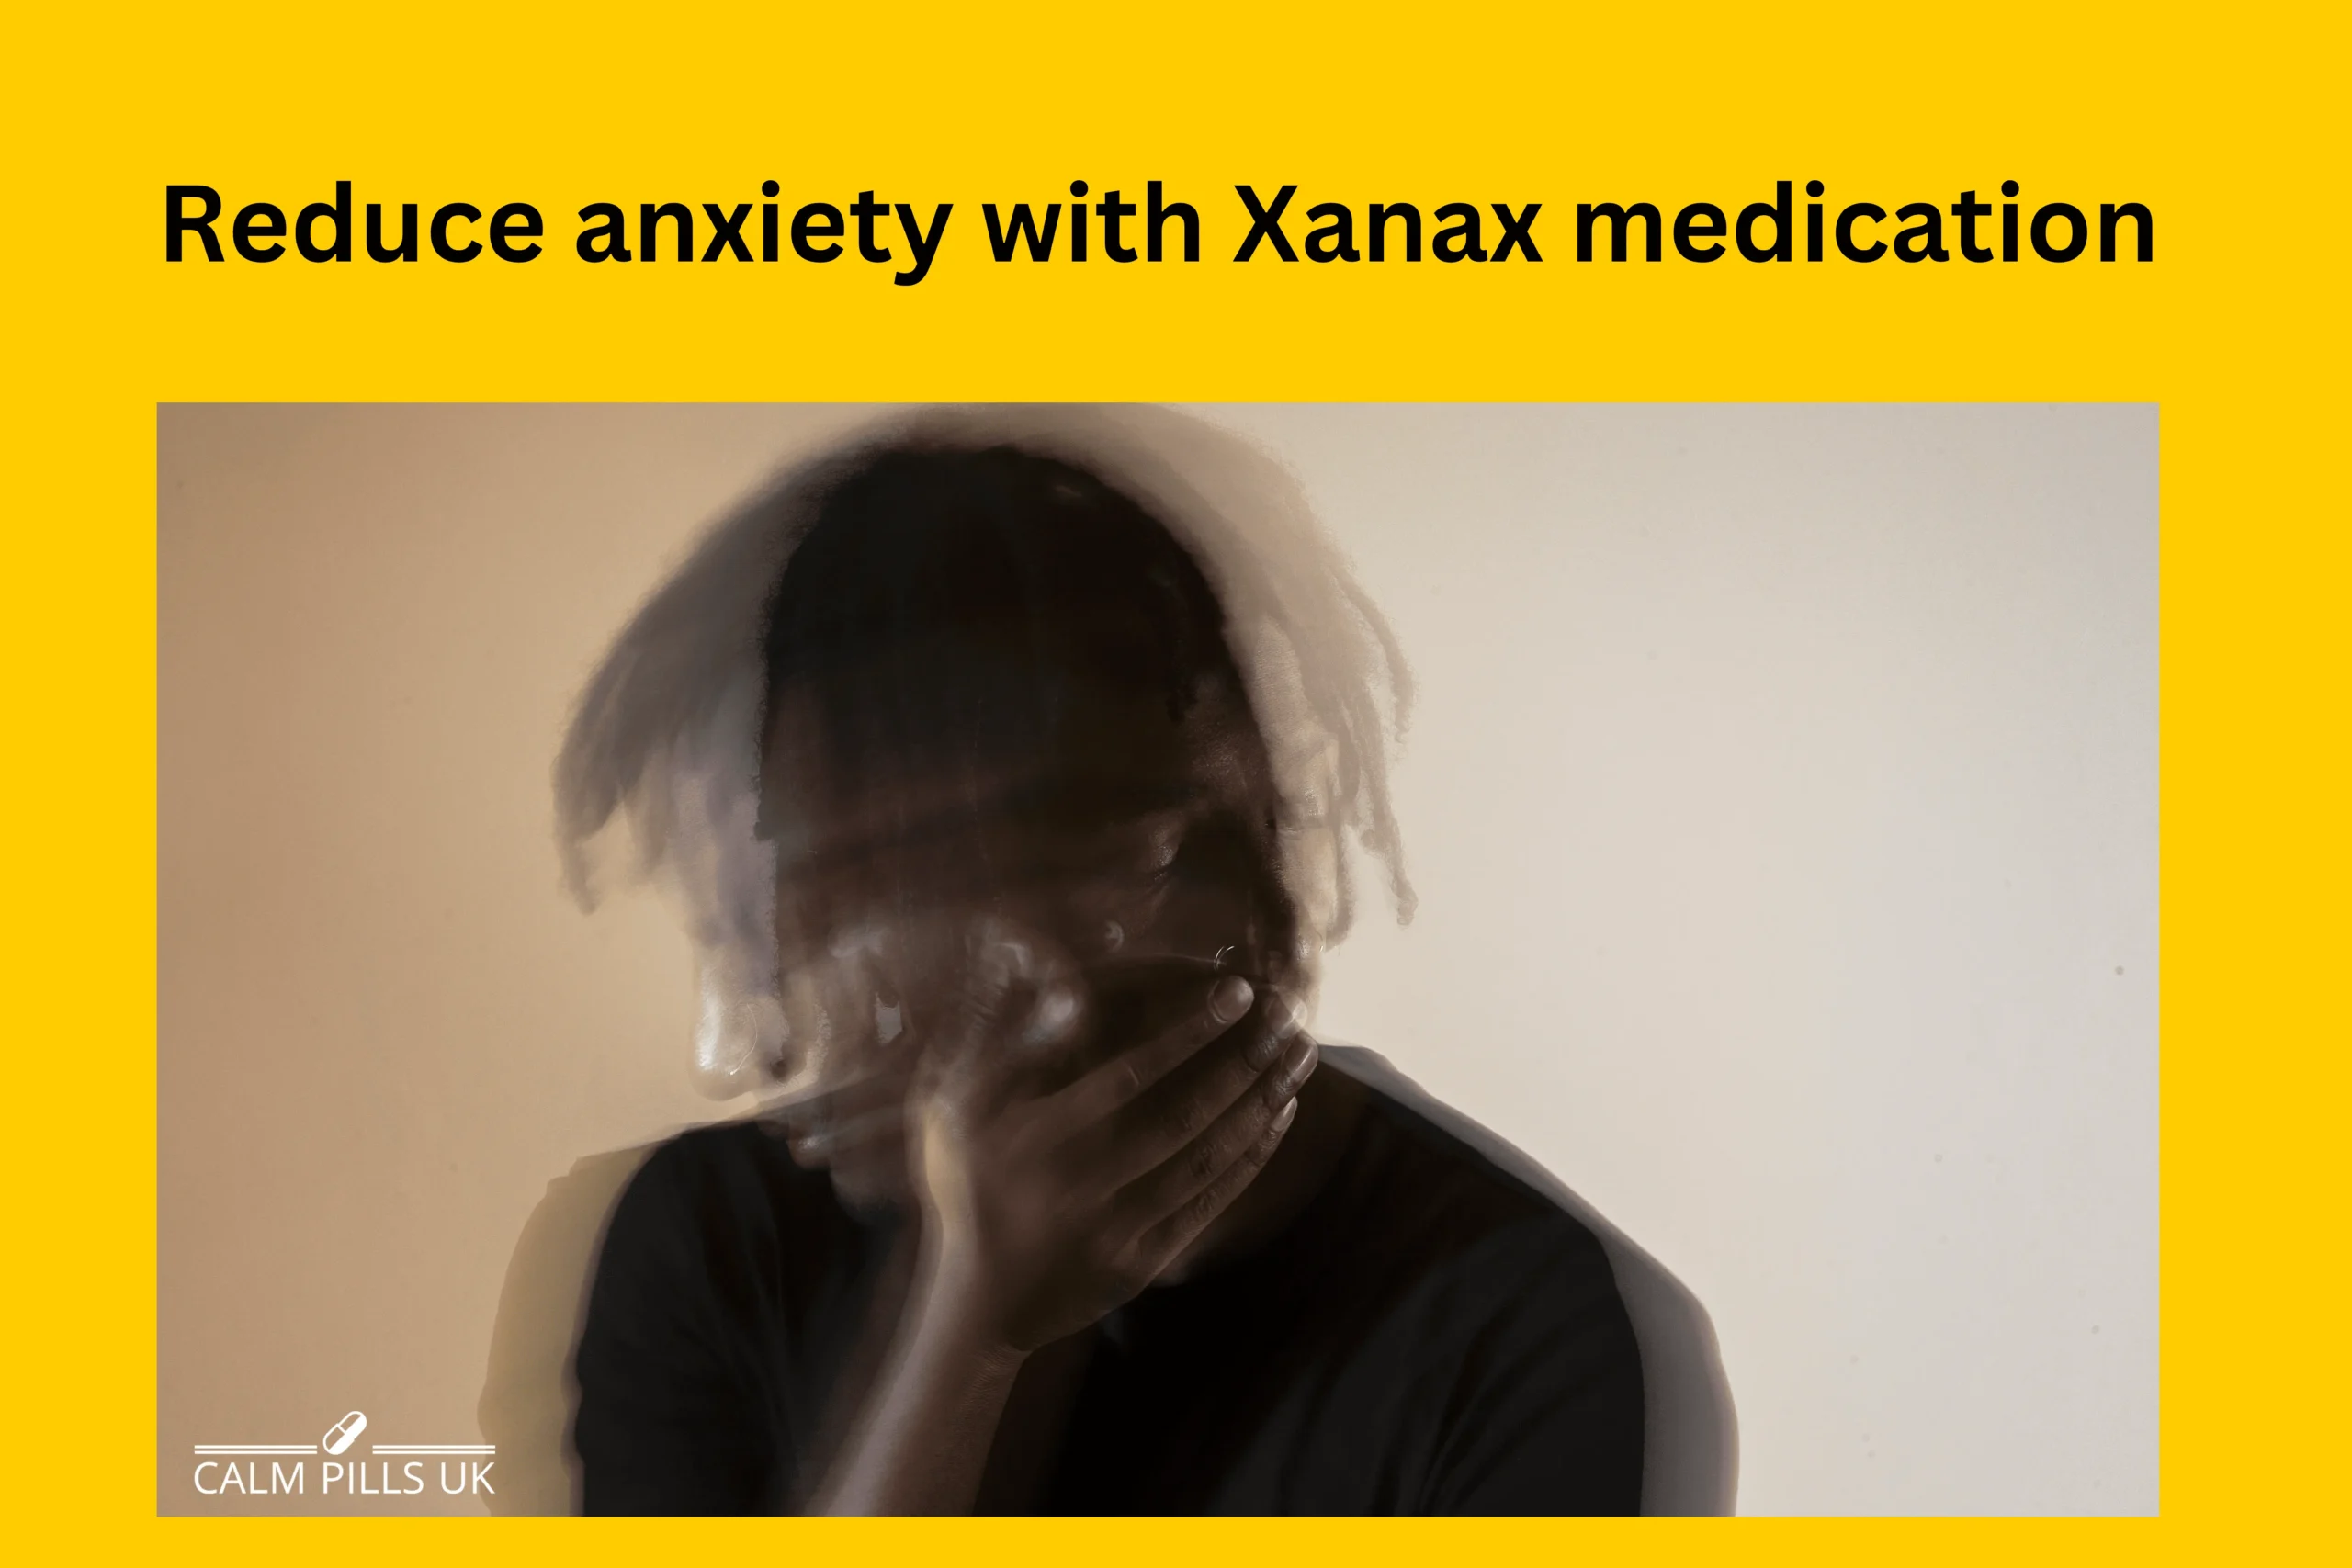 Understanding How does Xanax Medication Reduce Anxiety